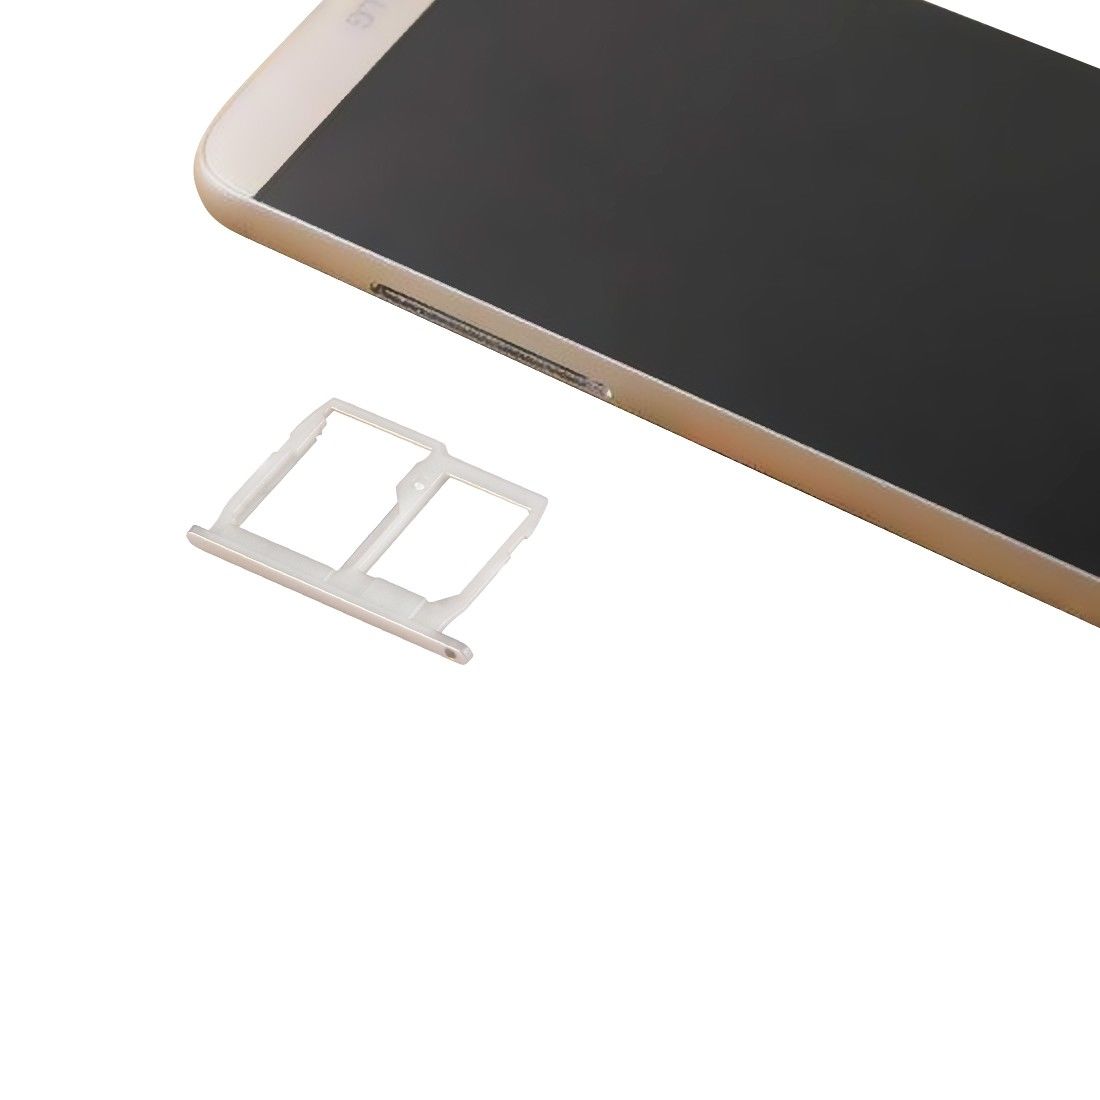 LG G5 Replacement MicroSD & Nano SIM Card Tray Holder - Gold for [product_price] - First Help Tech